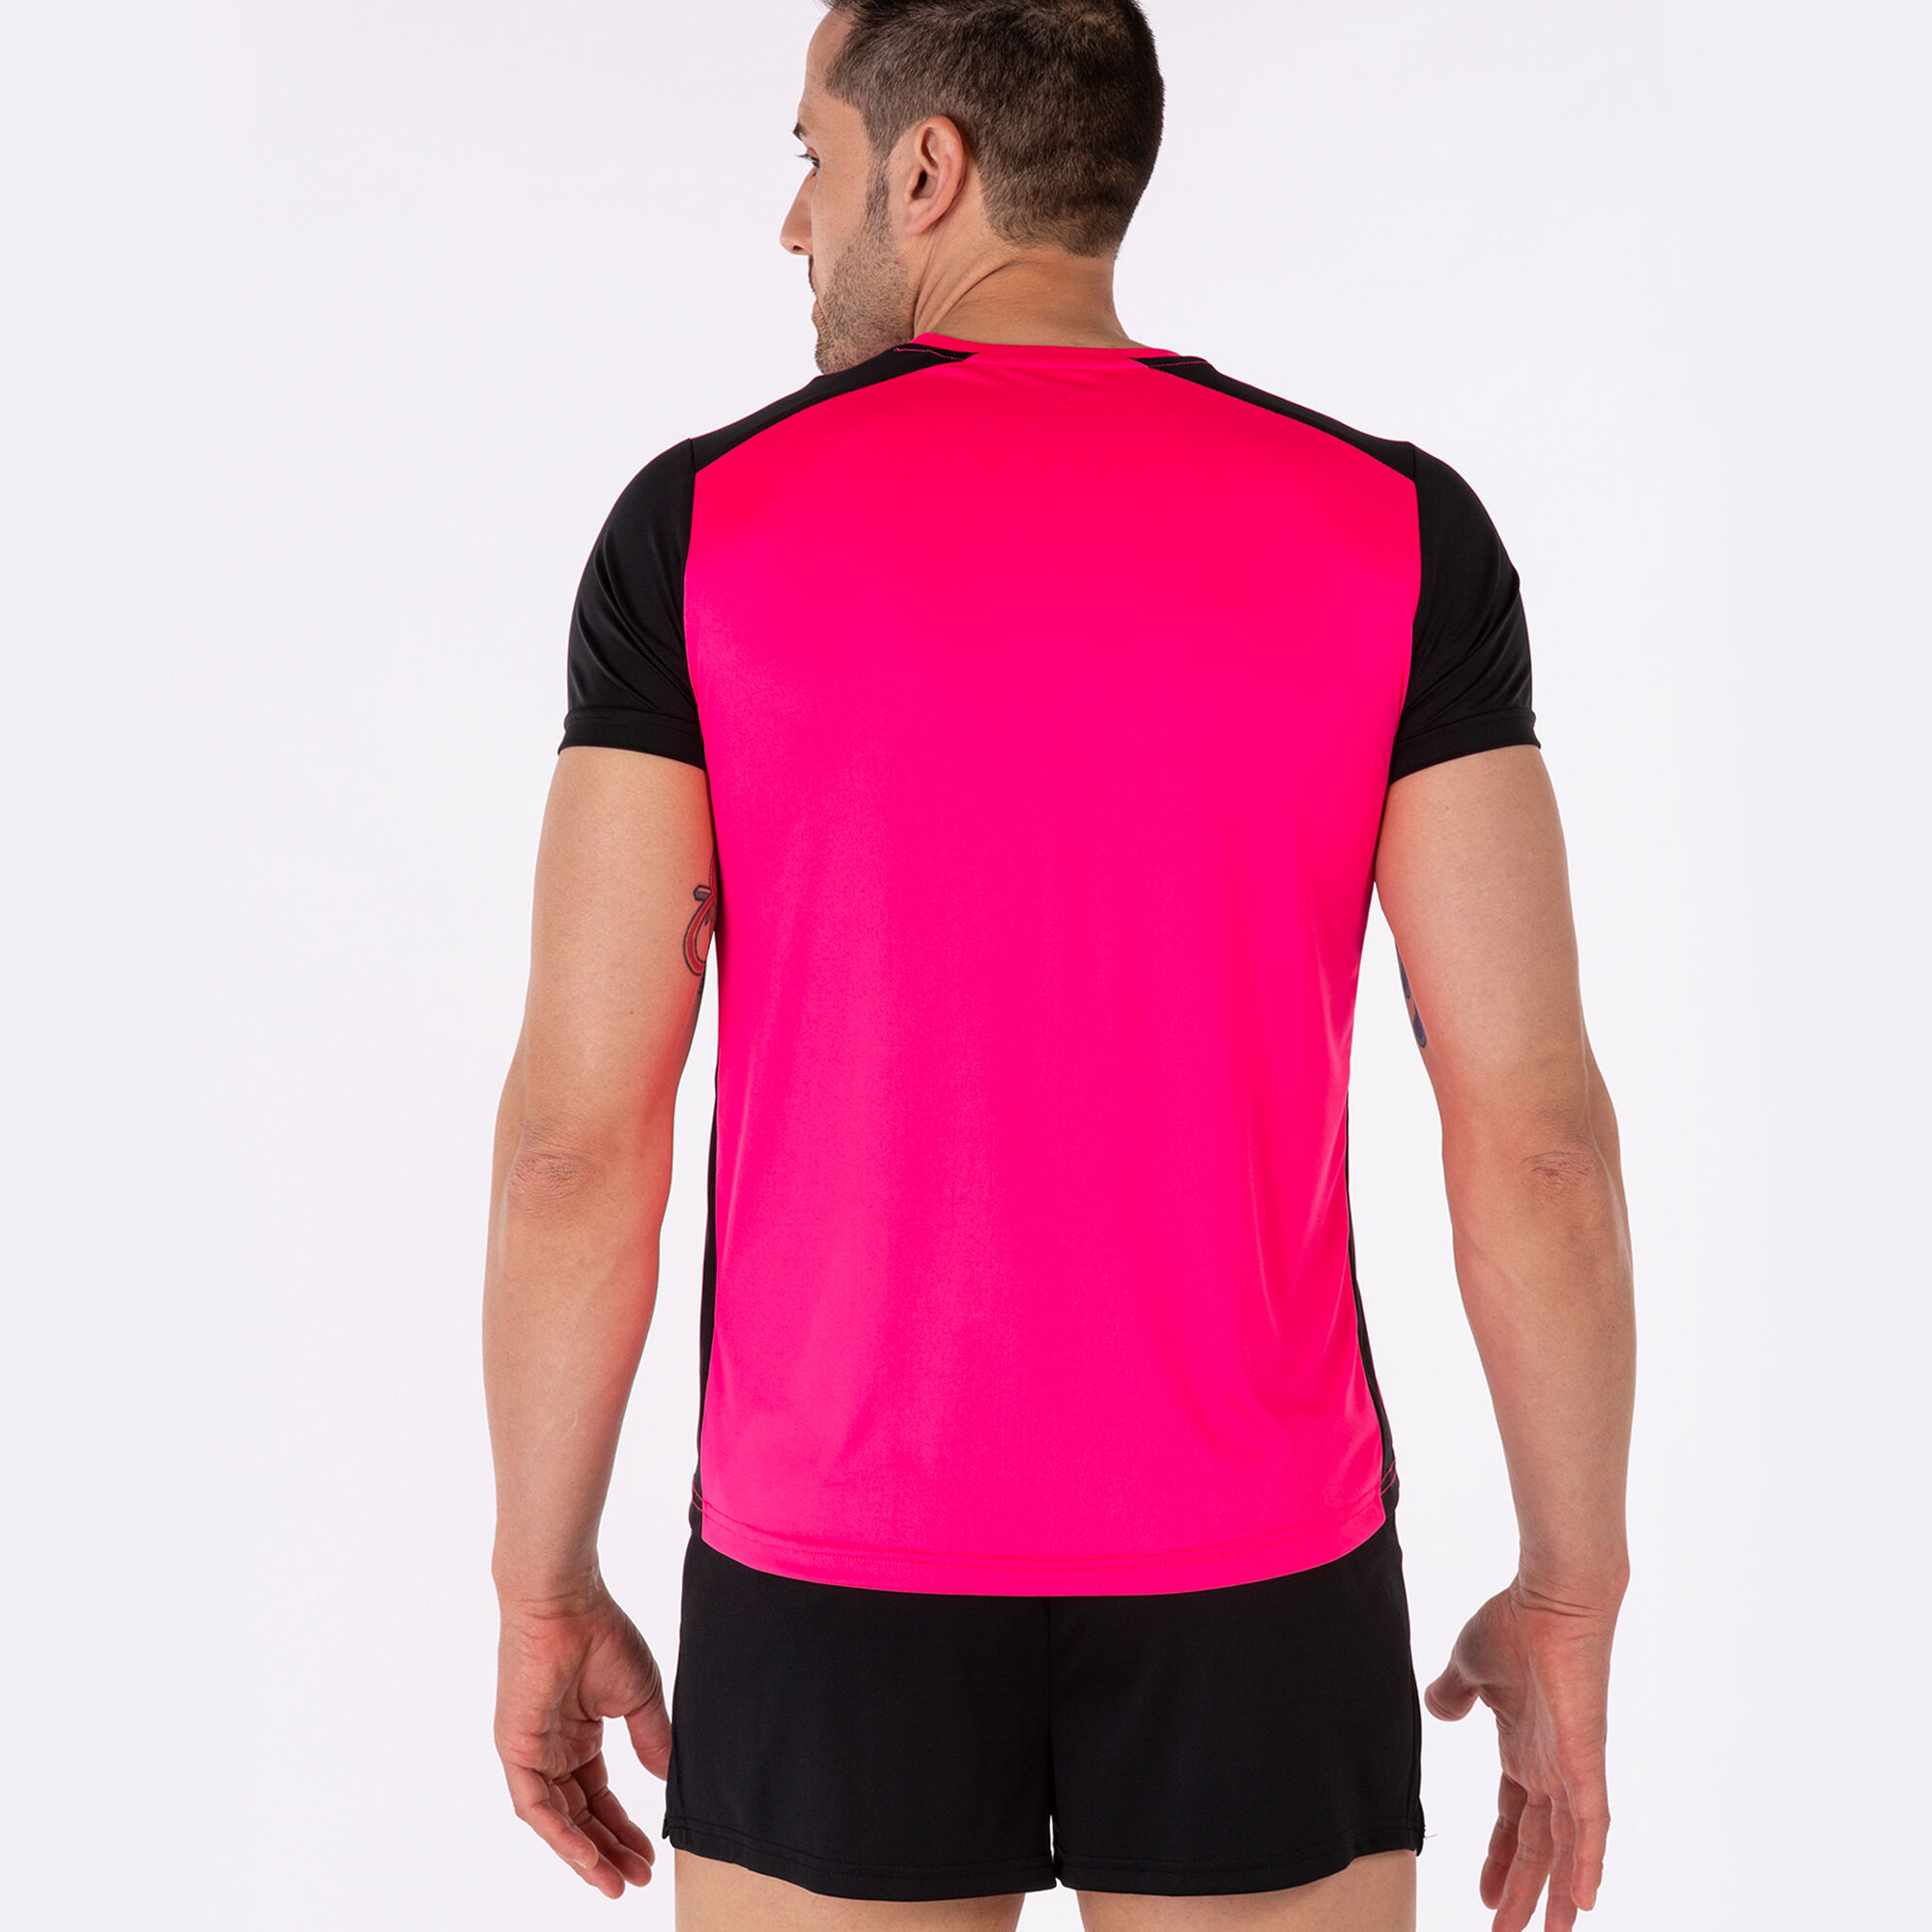 MAILLOT MANCHES COURTES HOMME RECORD II ROSE FLUO NOIR